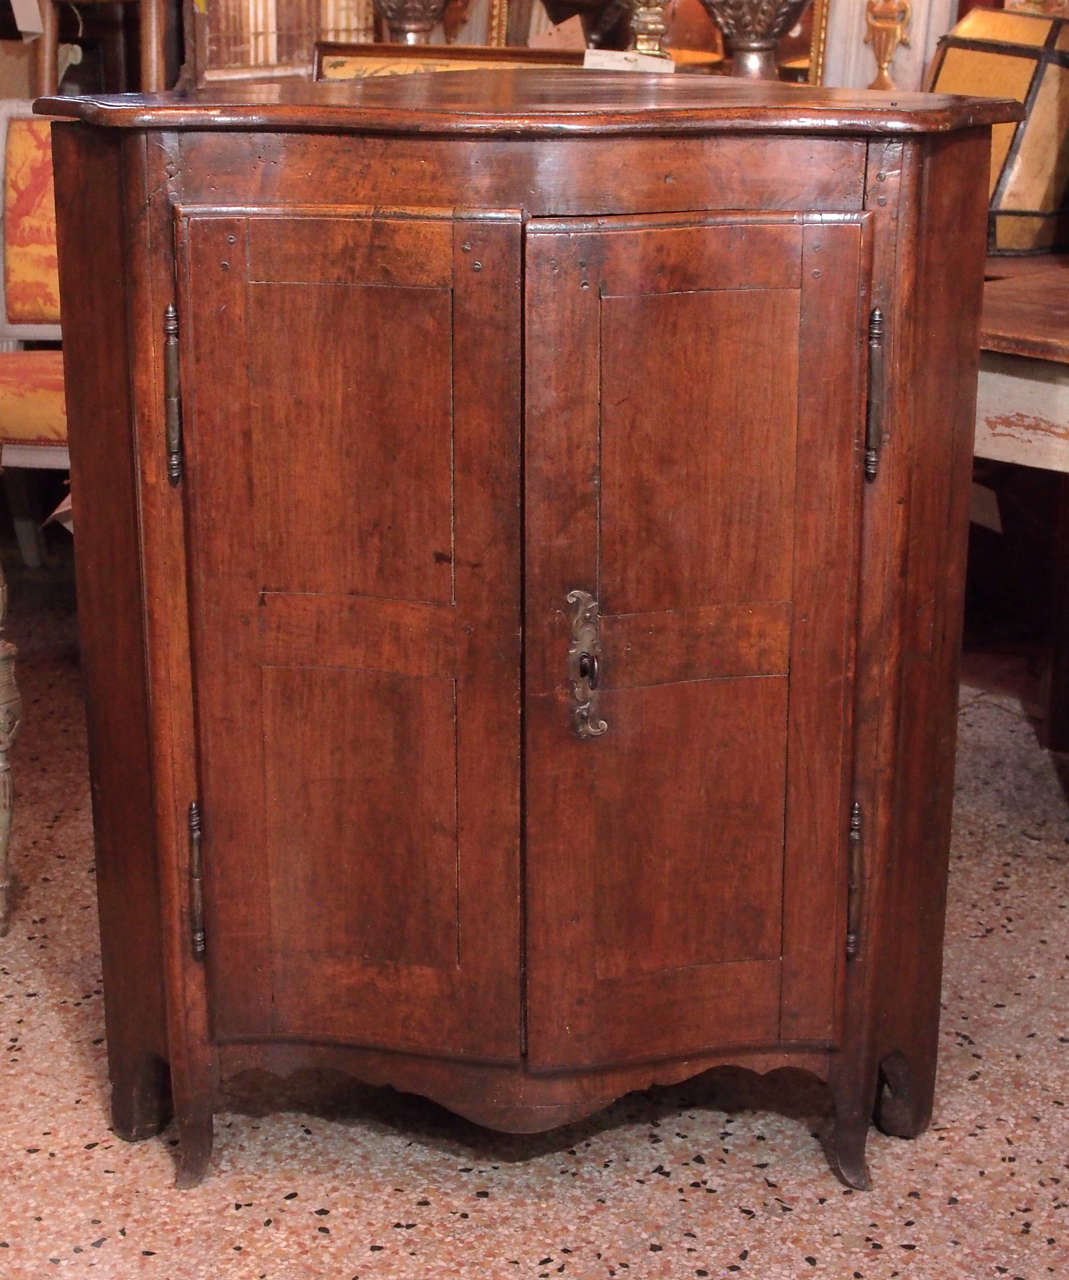 Late 18th century French mahogany corner cabinet.  Molded top over bombe shaped 2 panel doors, 2 interior shelves.